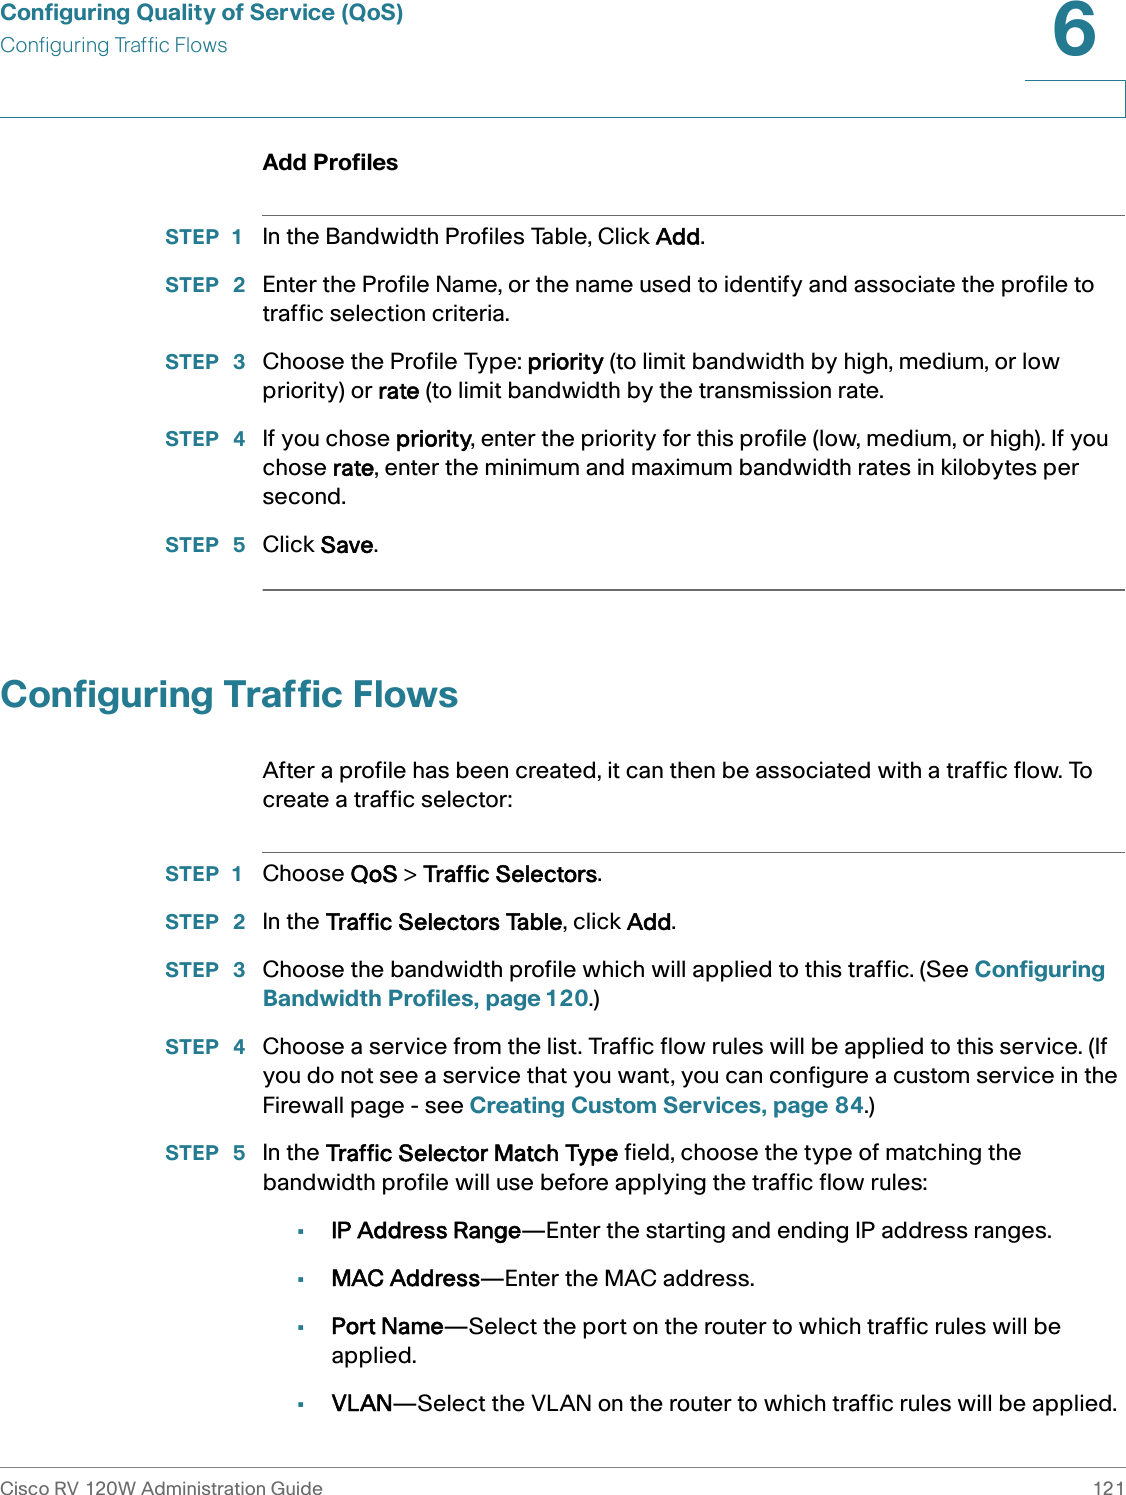 Configuring Quality of Service (QoS)Configuring Traffic FlowsCisco RV 120W Administration Guide 1216 Add ProfilesSTEP 1 In the Bandwidth Profiles Table, Click Add. STEP  2 Enter the Profile Name, or the name used to identify and associate the profile to traffic selection criteria.STEP  3 Choose the Profile Type: priority (to limit bandwidth by high, medium, or low priority) or rate (to limit bandwidth by the transmission rate.STEP  4 If you chose priority, enter the priority for this profile (low, medium, or high). If you chose rate, enter the minimum and maximum bandwidth rates in kilobytes per second.STEP  5 Click Save. Configuring Traffic FlowsAfter a profile has been created, it can then be associated with a traffic flow. To create a traffic selector:STEP 1 Choose QoS &gt; Traffic Selectors.STEP  2 In the Traffic Selectors Table, click Add.STEP  3 Choose the bandwidth profile which will applied to this traffic. (See Configuring Bandwidth Profiles, page 120.)STEP  4 Choose a service from the list. Traffic flow rules will be applied to this service. (If you do not see a service that you want, you can configure a custom service in the Firewall page - see Creating Custom Services, page 84.)STEP  5 In the Traffic Selector Match Type field, choose the type of matching the bandwidth profile will use before applying the traffic flow rules: •IP Address Range—Enter the starting and ending IP address ranges.•MAC Address—Enter the MAC address.•Port Name—Select the port on the router to which traffic rules will be applied.•VLAN—Select the VLAN on the router to which traffic rules will be applied.